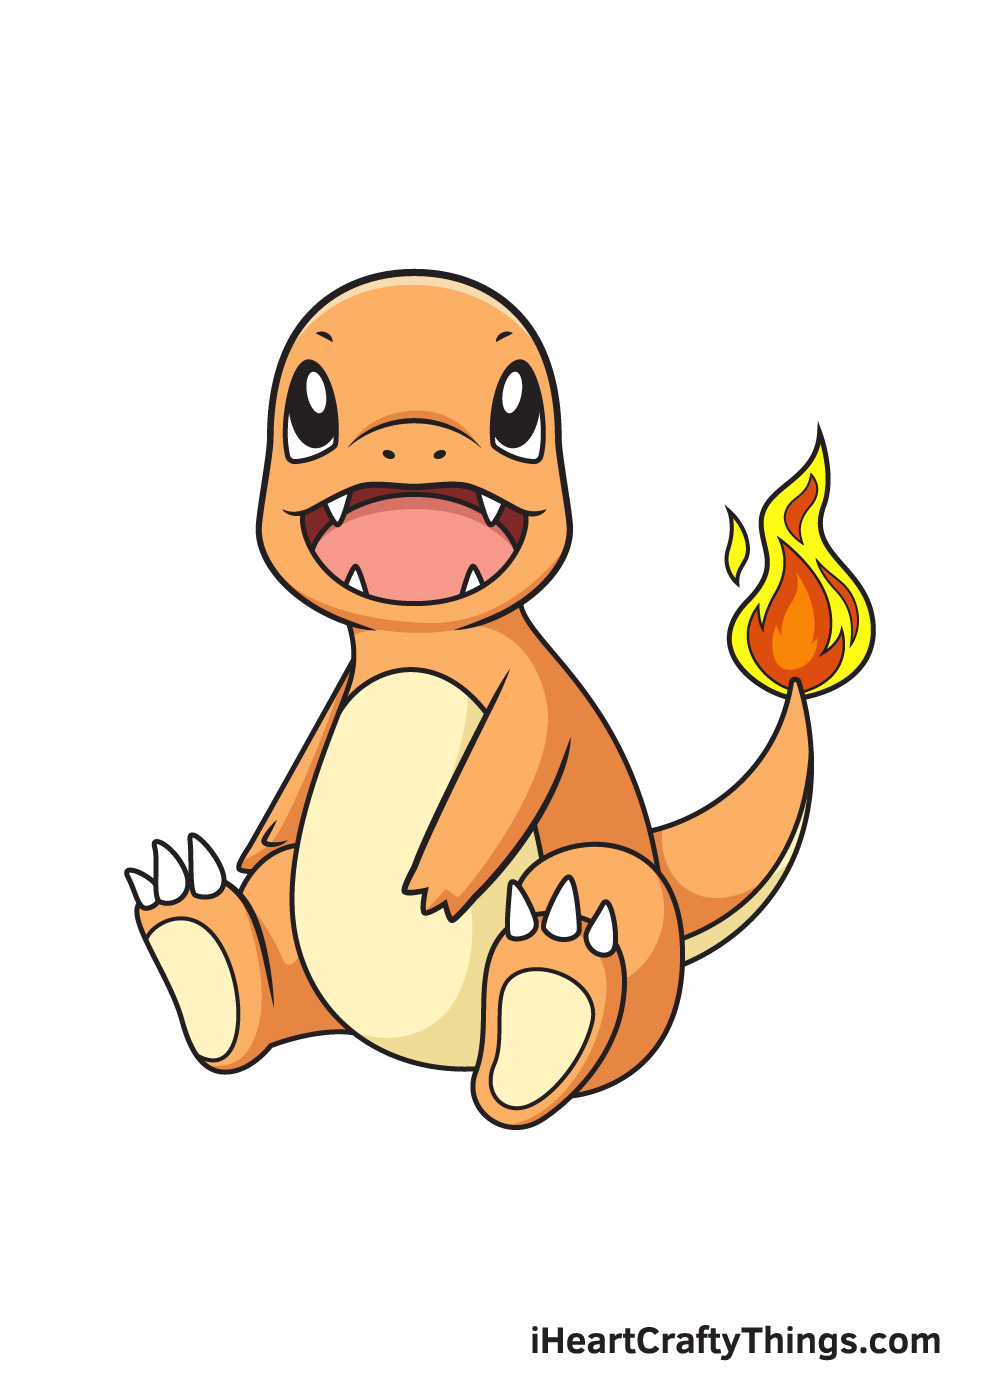 Learn how to draw a Charmander drawing - Pokemons - EASY TO DRAW EVERYTHING